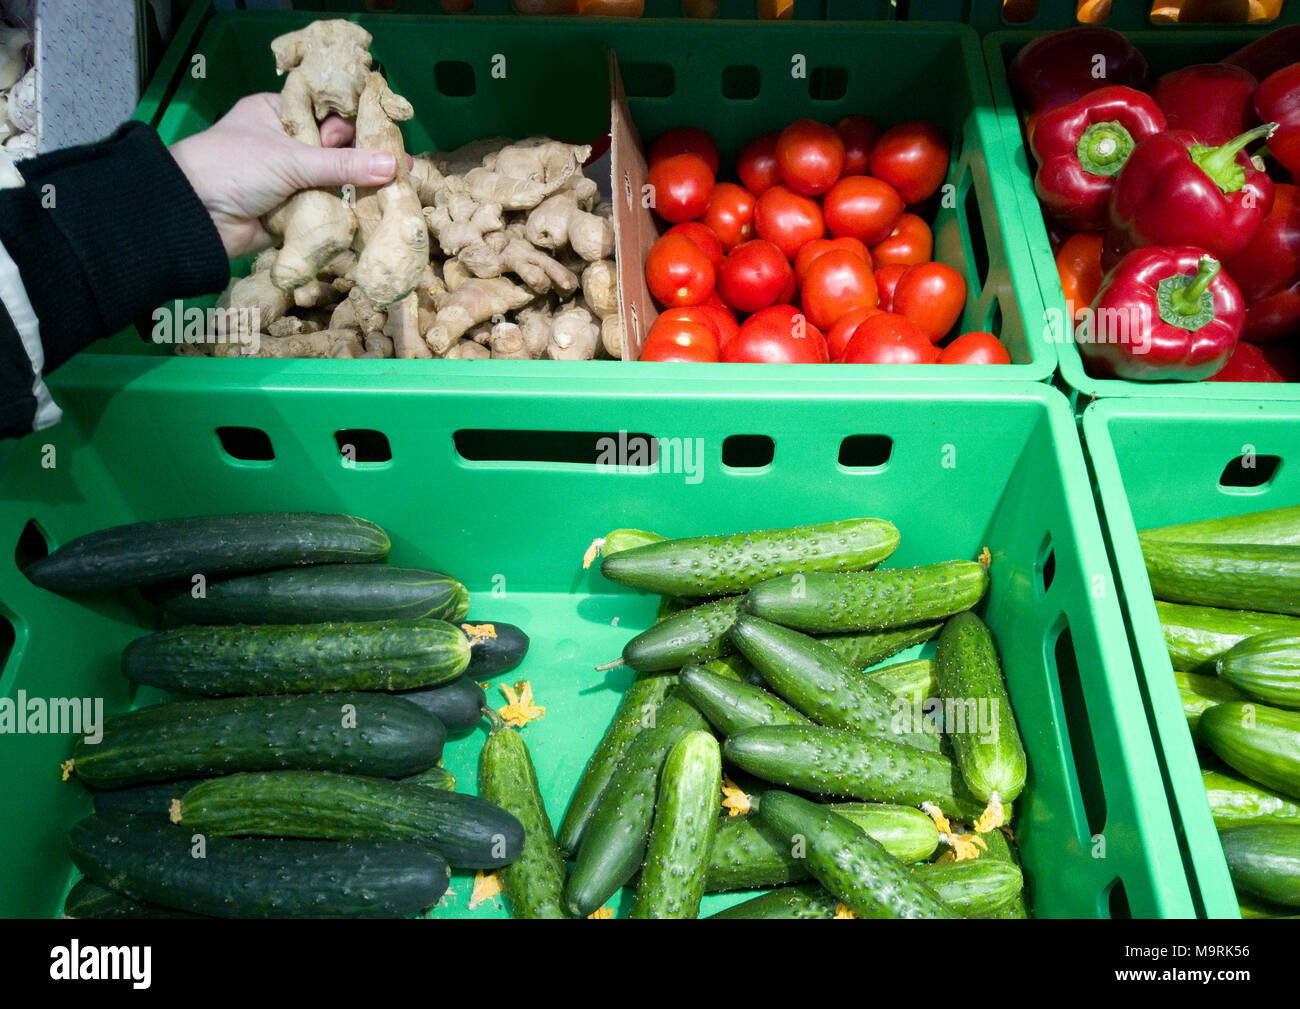 The buyer chooses vegetables in the window where there is ginger, tomatoes, peppers and cucumbers. Stock Photo